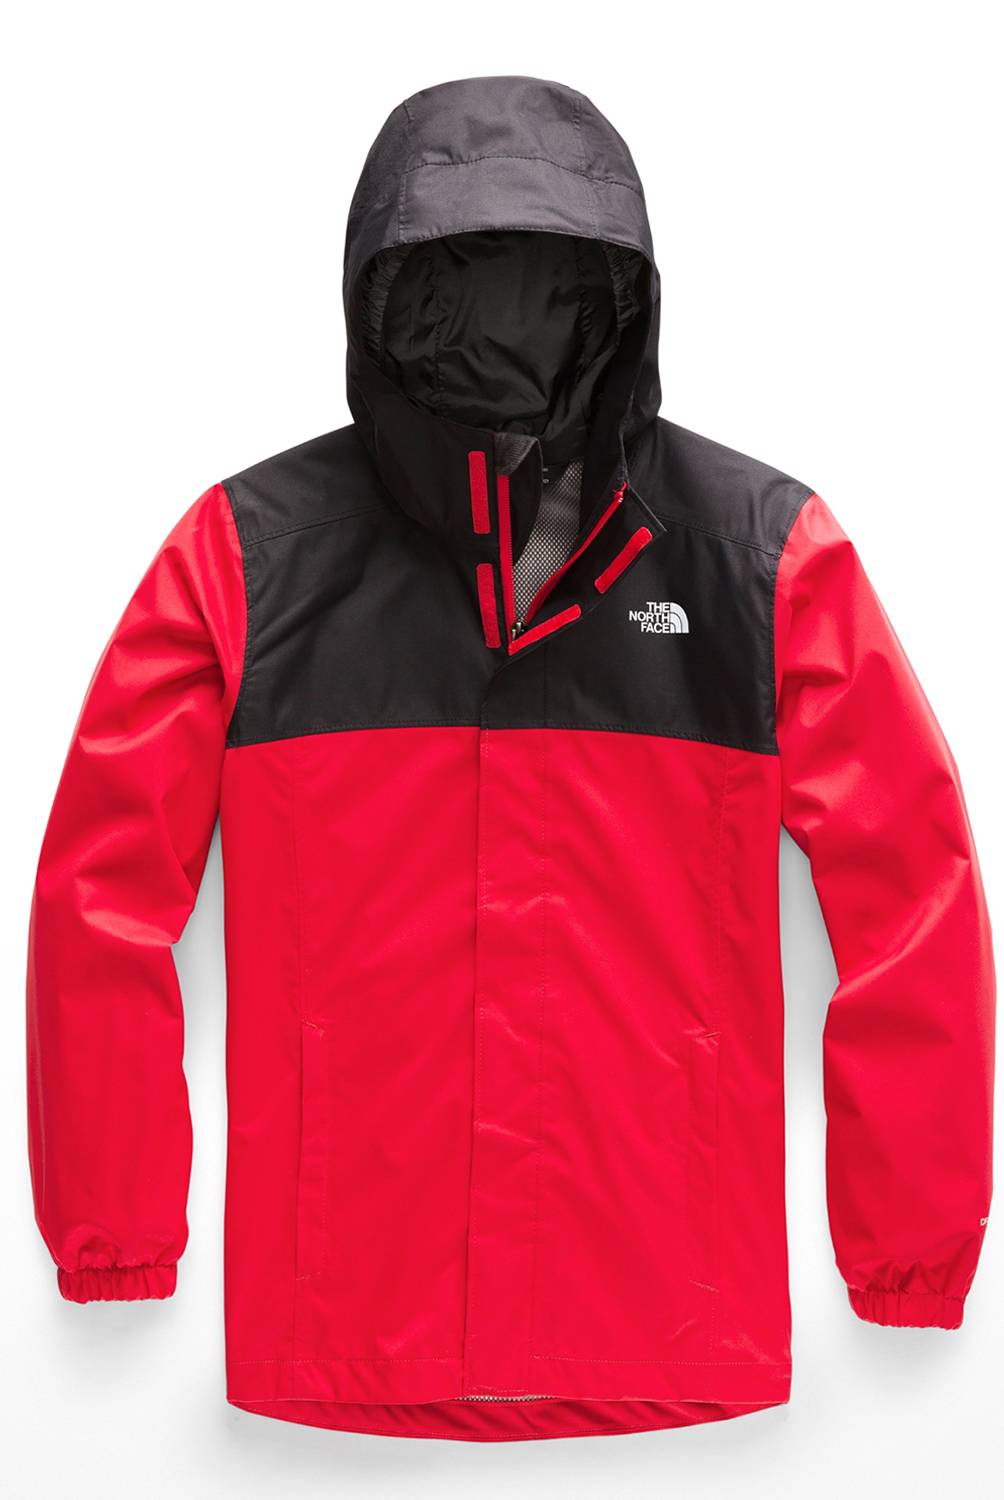 THE NORTH FACE - Casaca infantil outdoors